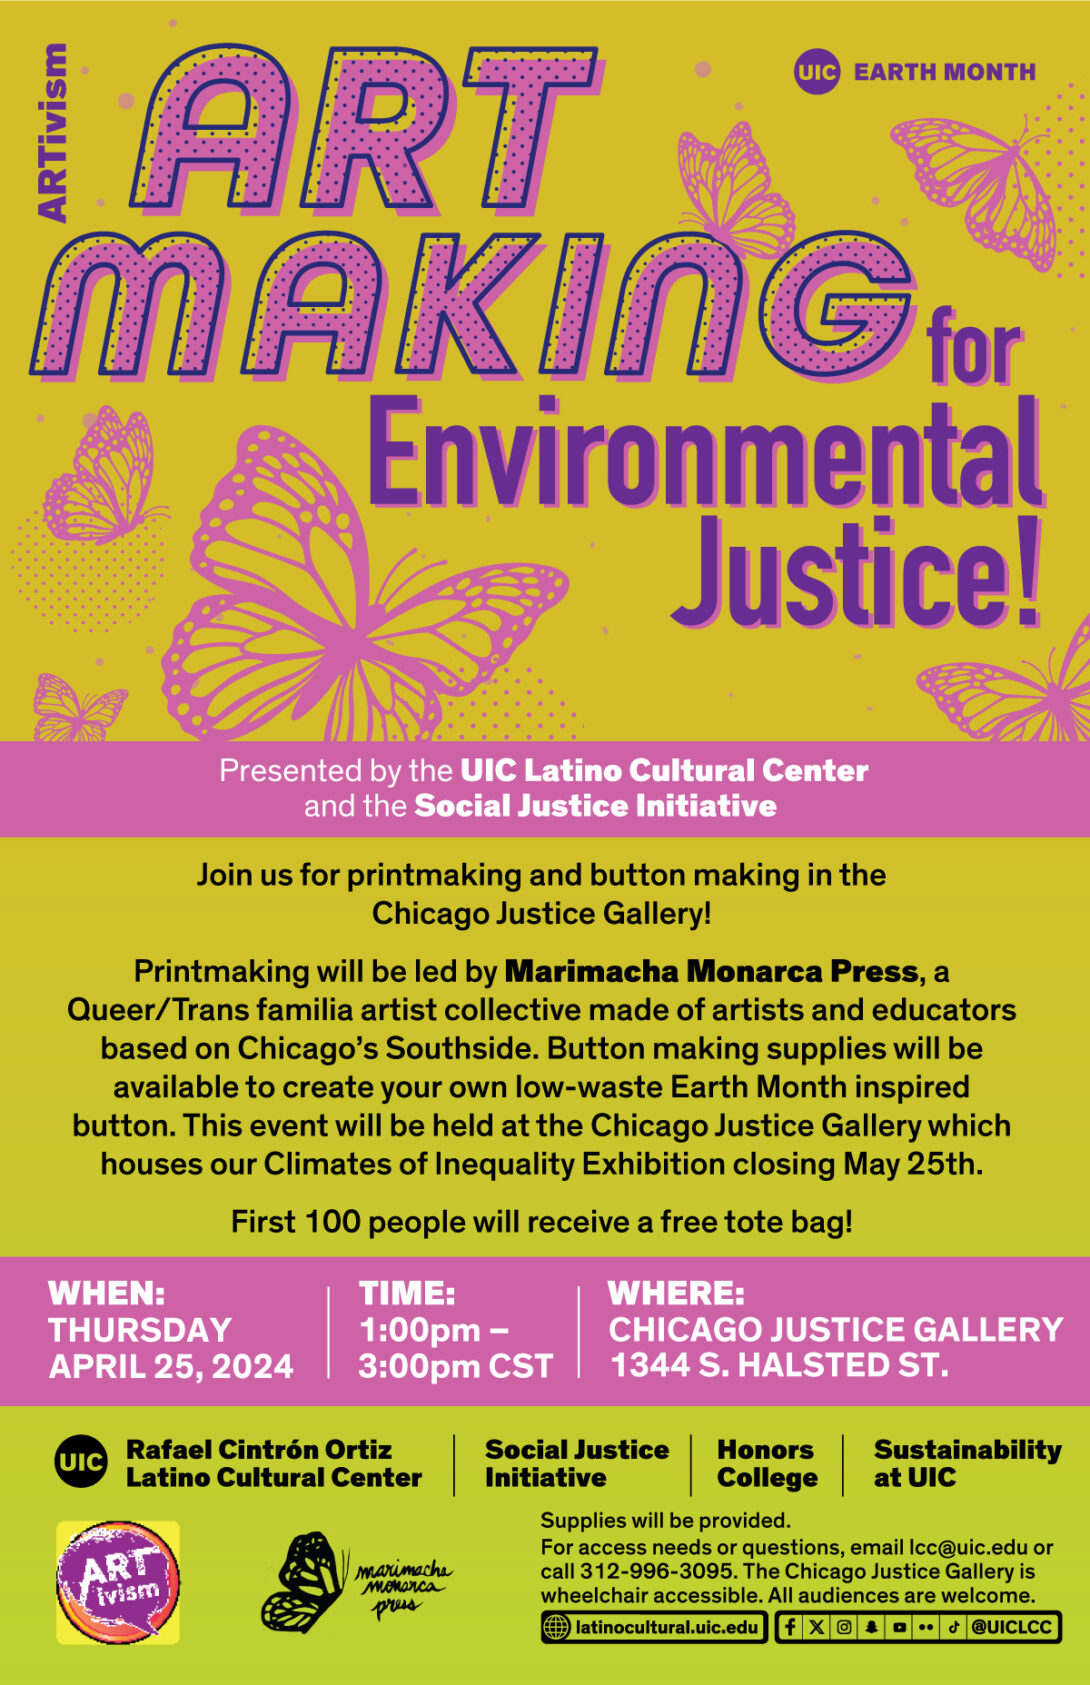 pink text and pink butterflies at the top, with a yellow background, invite folks to make art for environmental justice